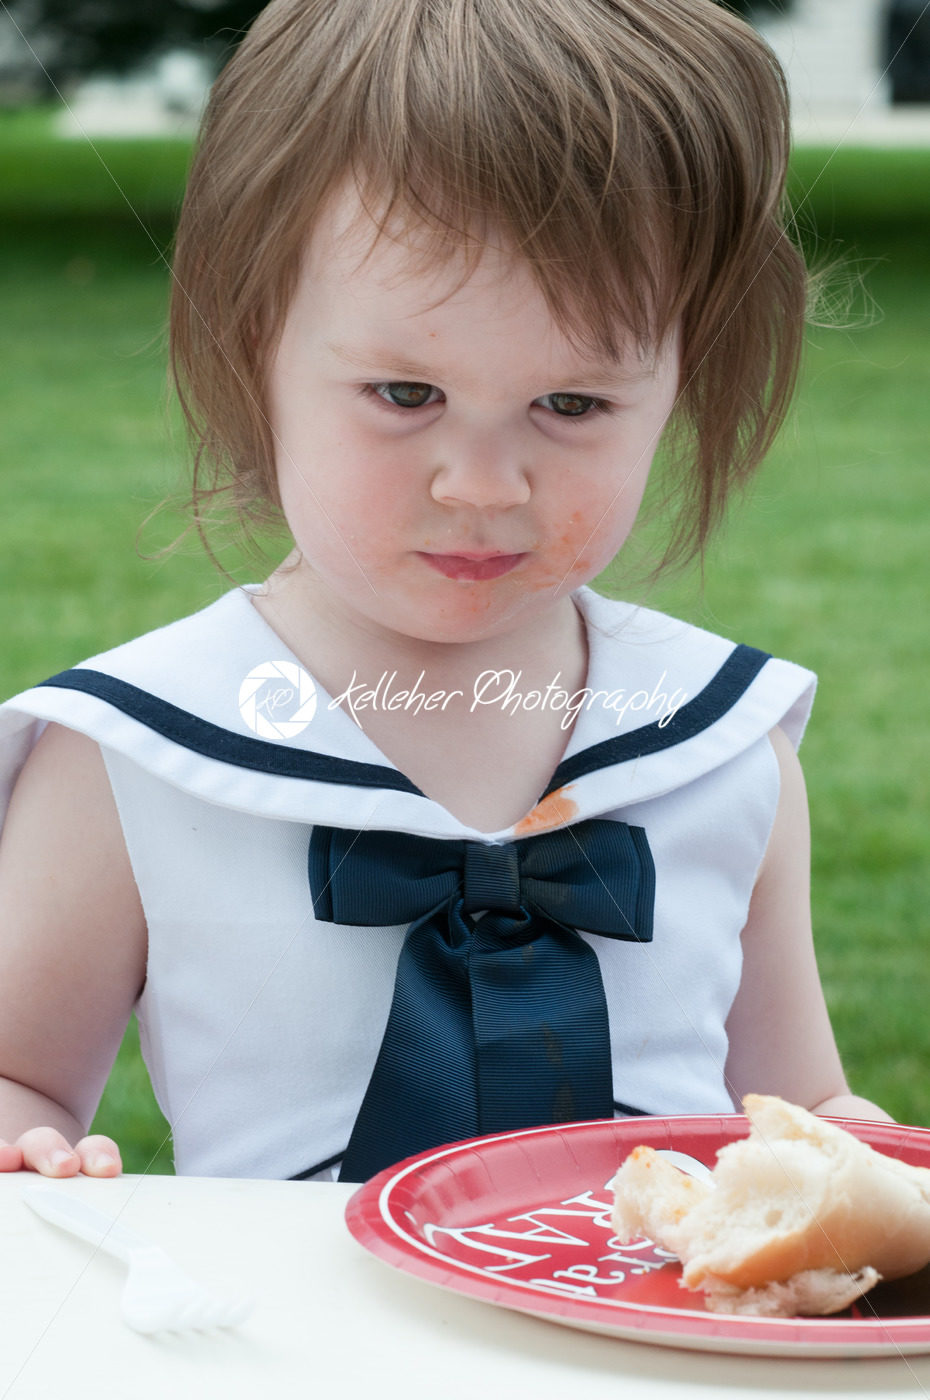 Young girl in fancy dress outside eating - Kelleher Photography Store